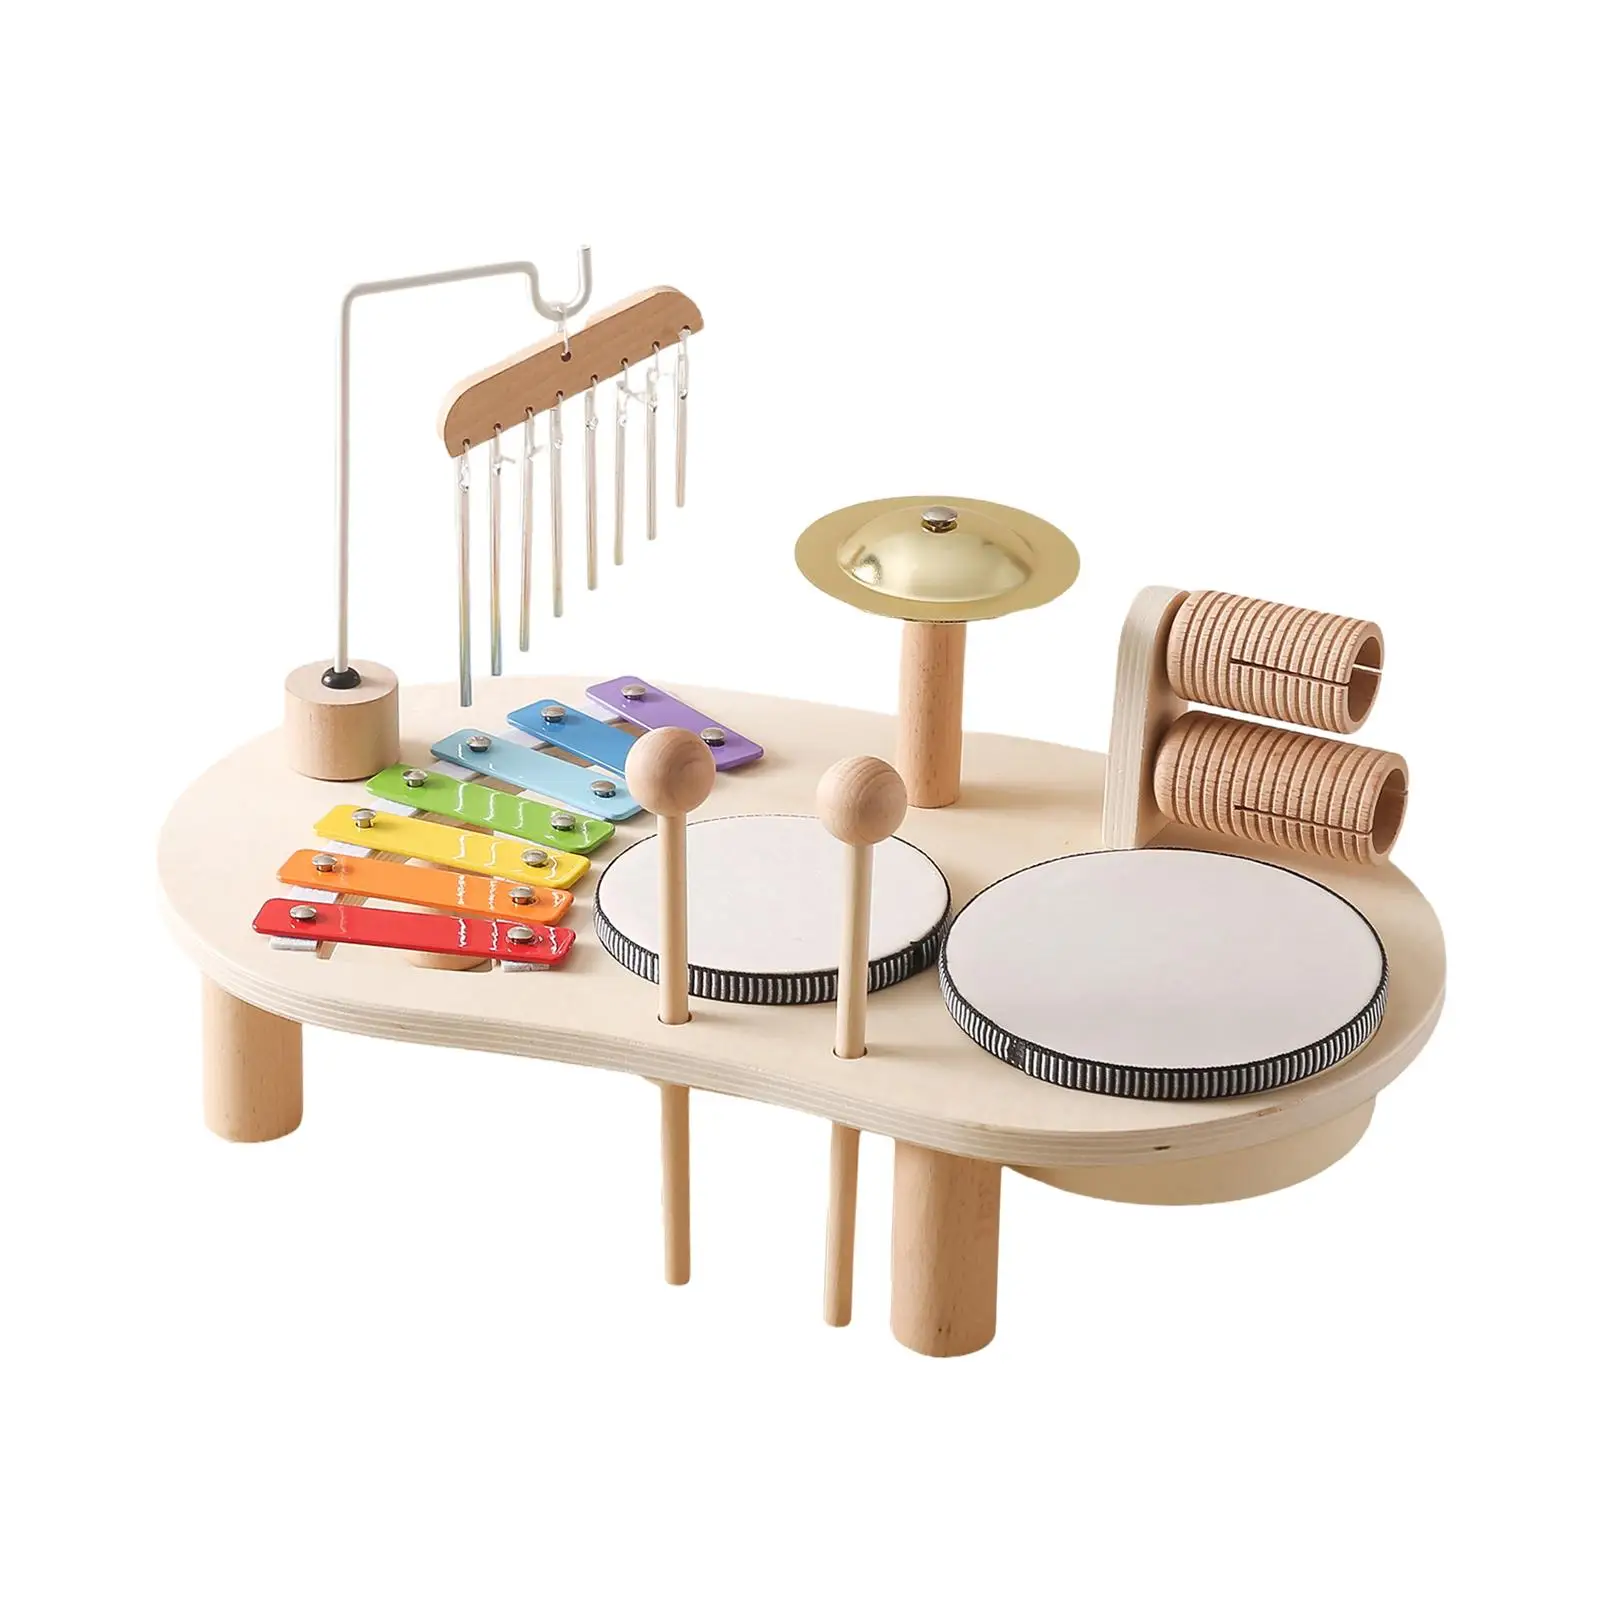 Kids Drum Set Creativity Hand Percussion Wooden Musical Kits